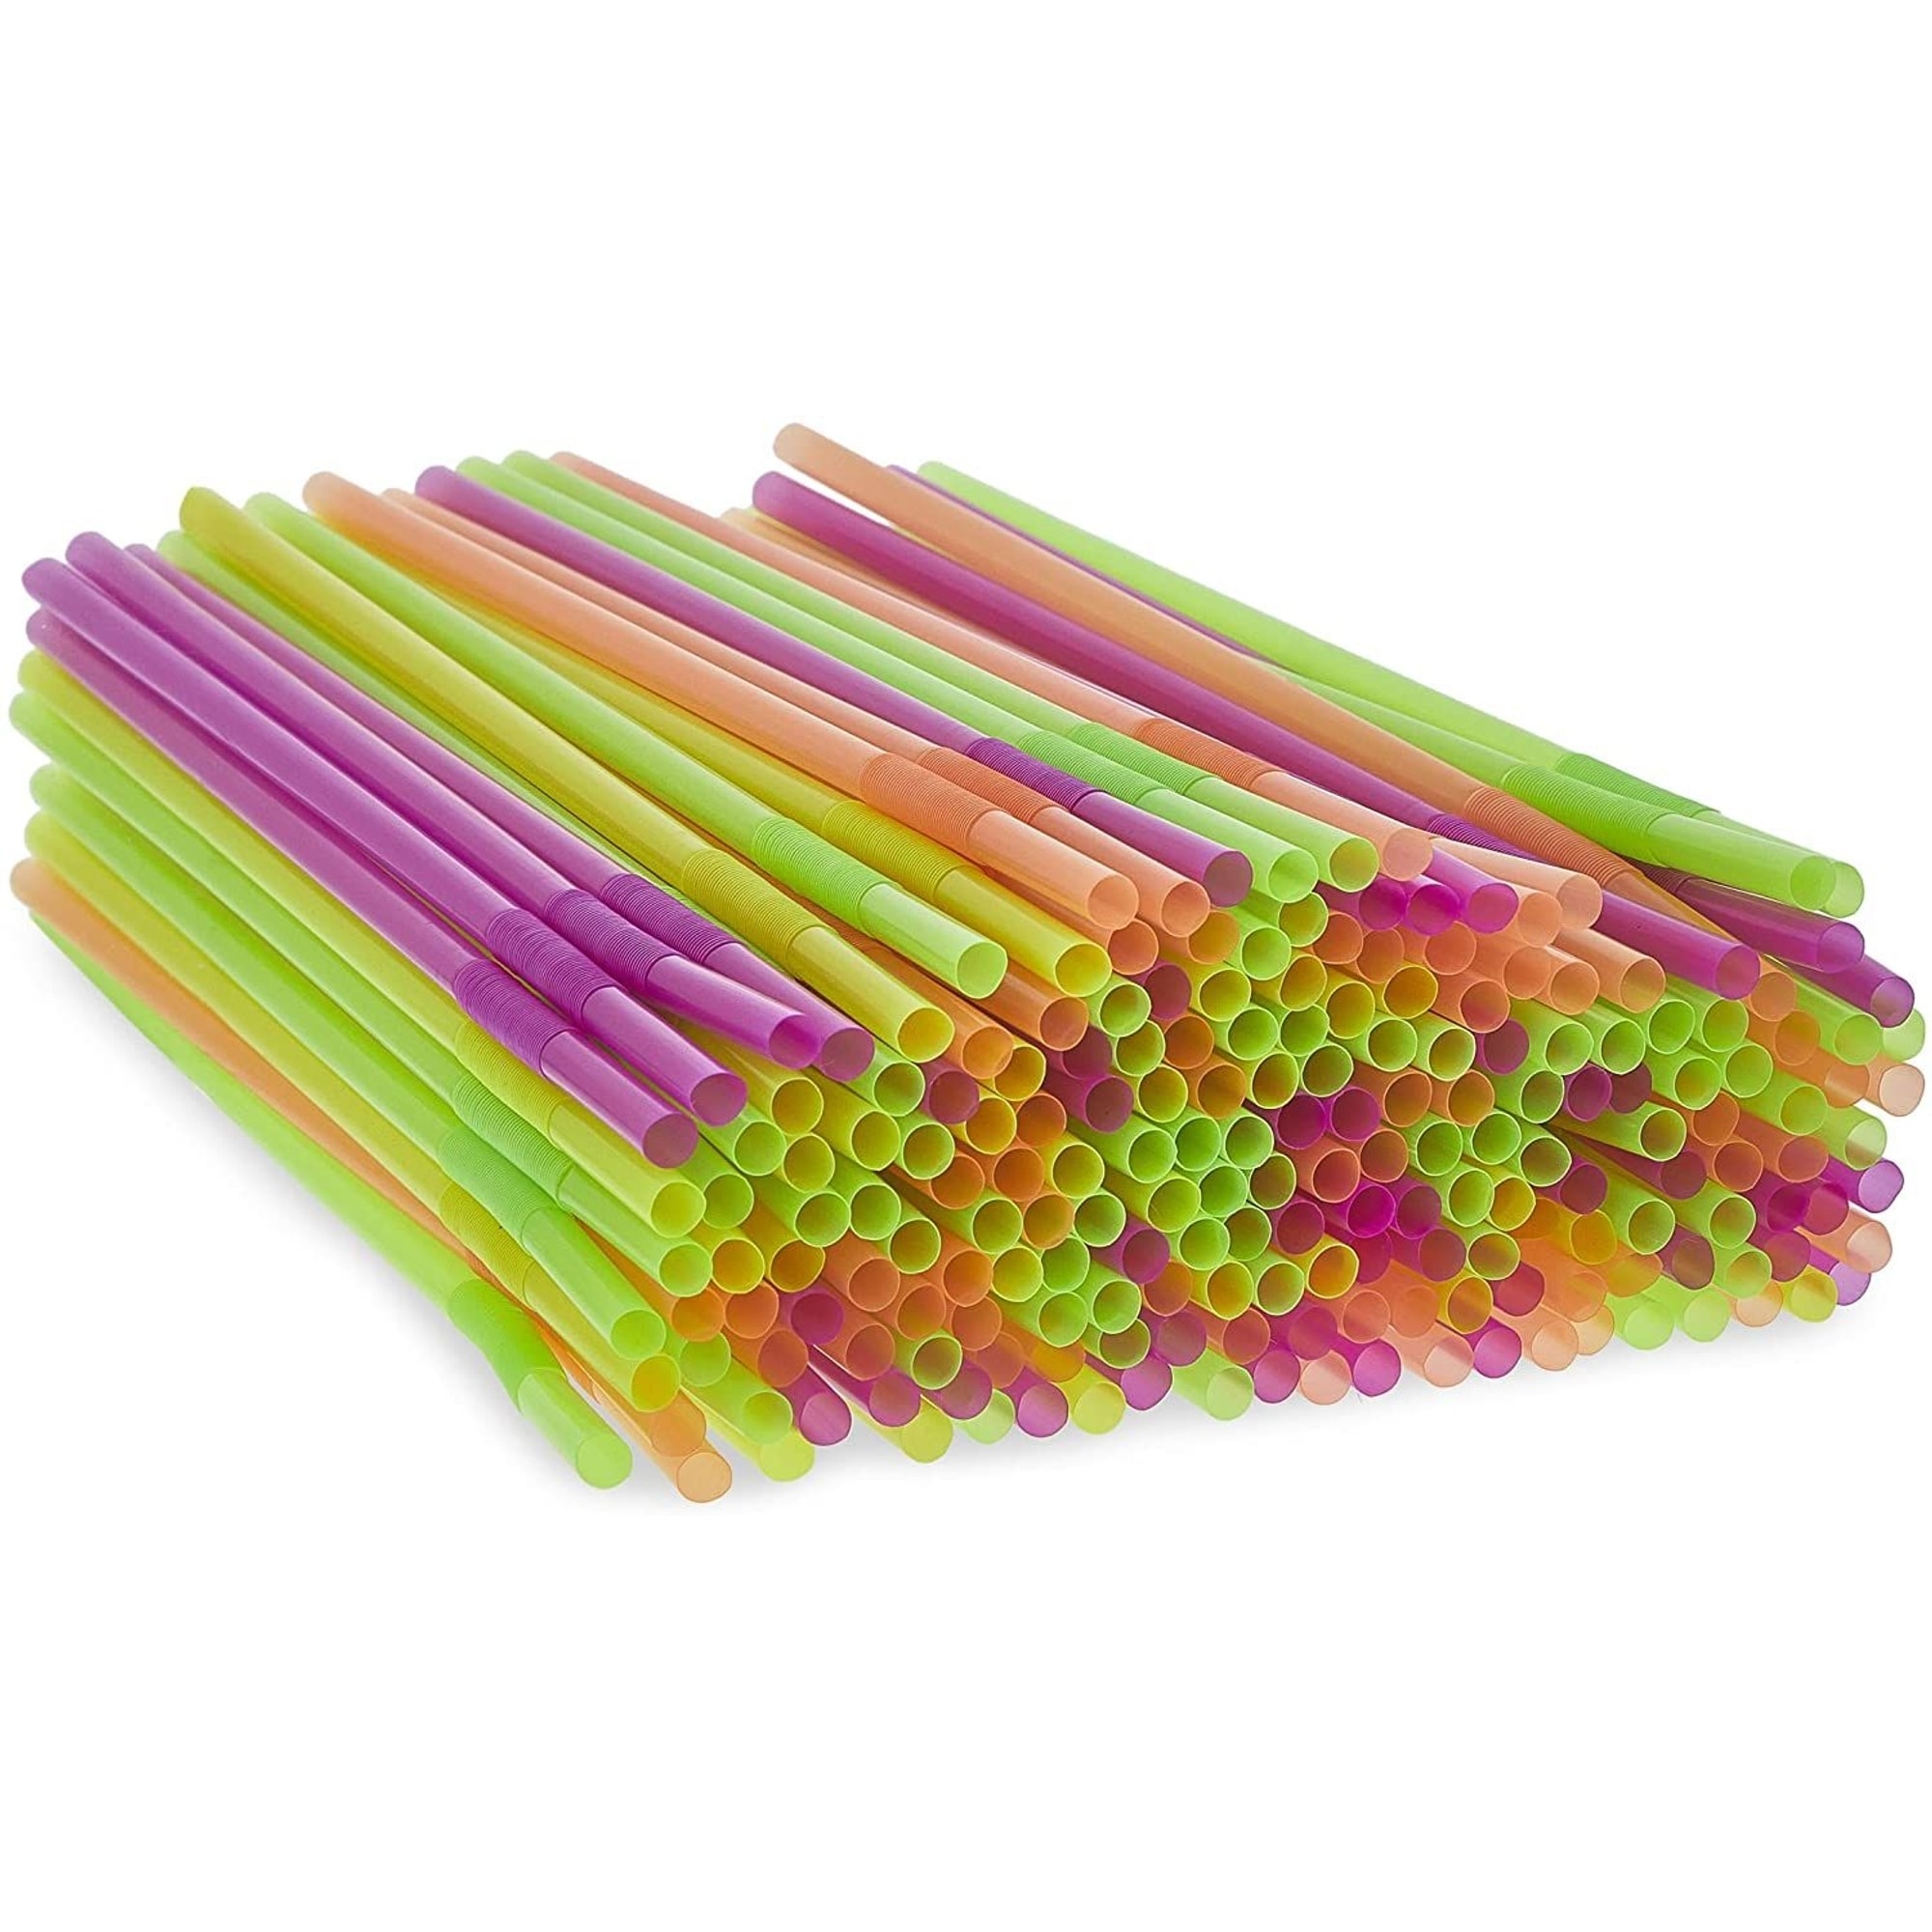 200 PCS Extended Straws Plastic,13 inch Straws,BPA-Free Drinking Straw,  Flexible Reusable Straws, Bendy Fancy Straws, Party Decorations